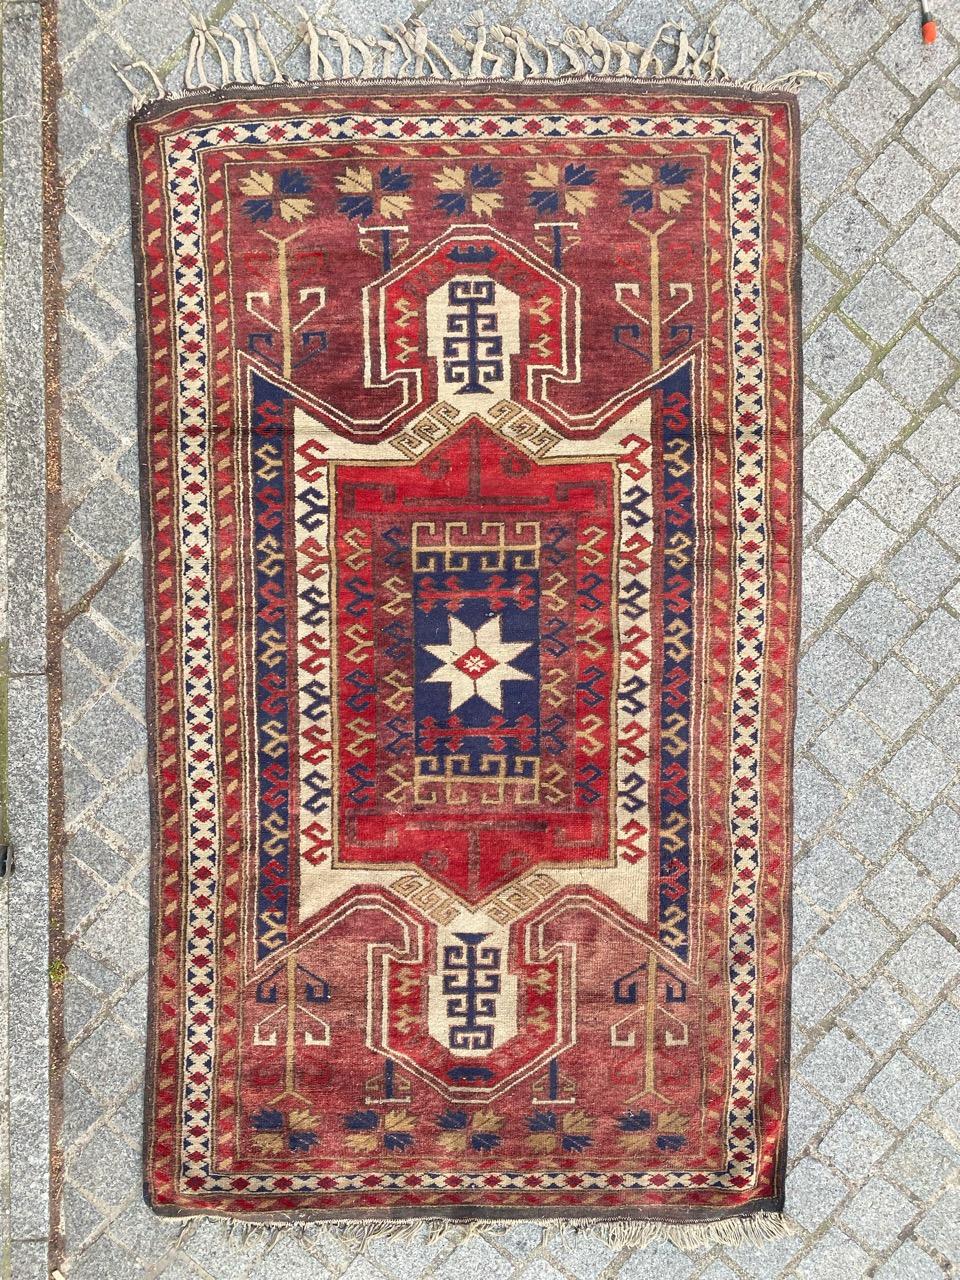 Nice mid-century Turkish Anatolian rug with beautiful Kazak design and nice colors, entirely hand knotted with wool velvet on wool foundation.

✨✨✨
